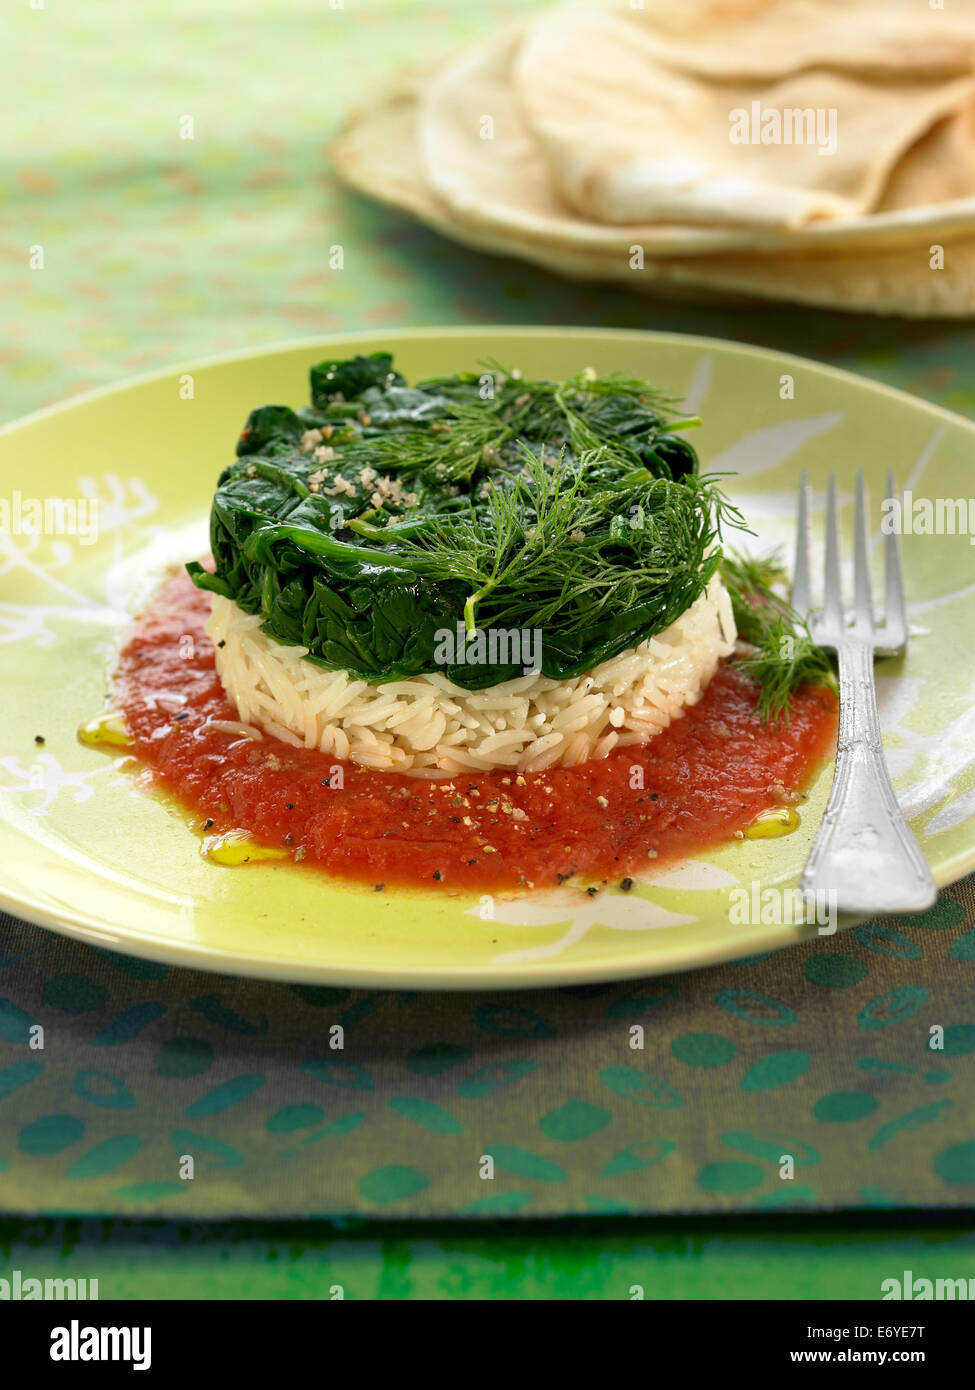 Basmati rice and spinach timbale with tomato sauce Stock Photo